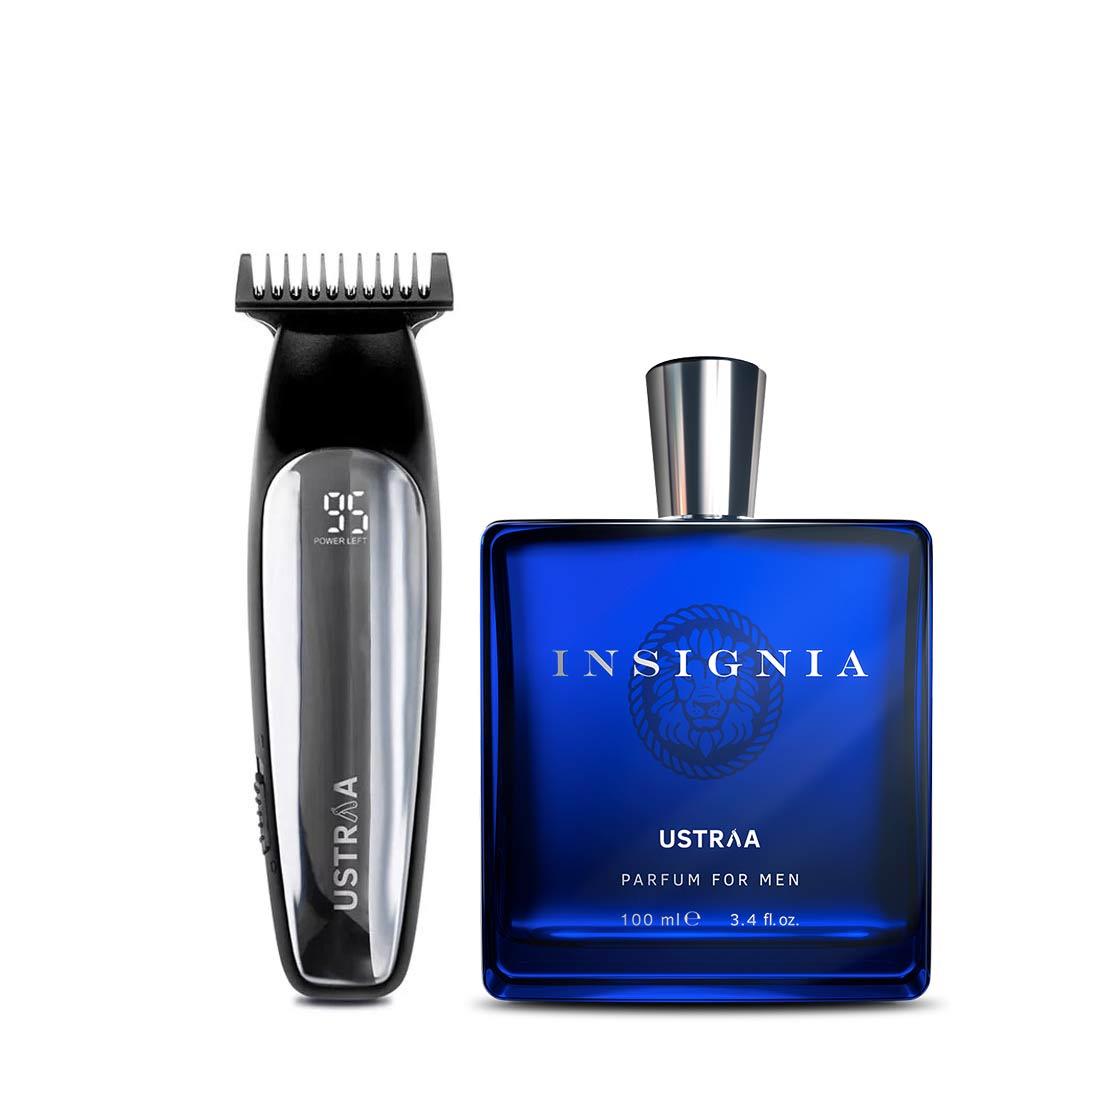 Ustraa Chrome Trimmer and Insignia Perfume: Set of 2 For Men